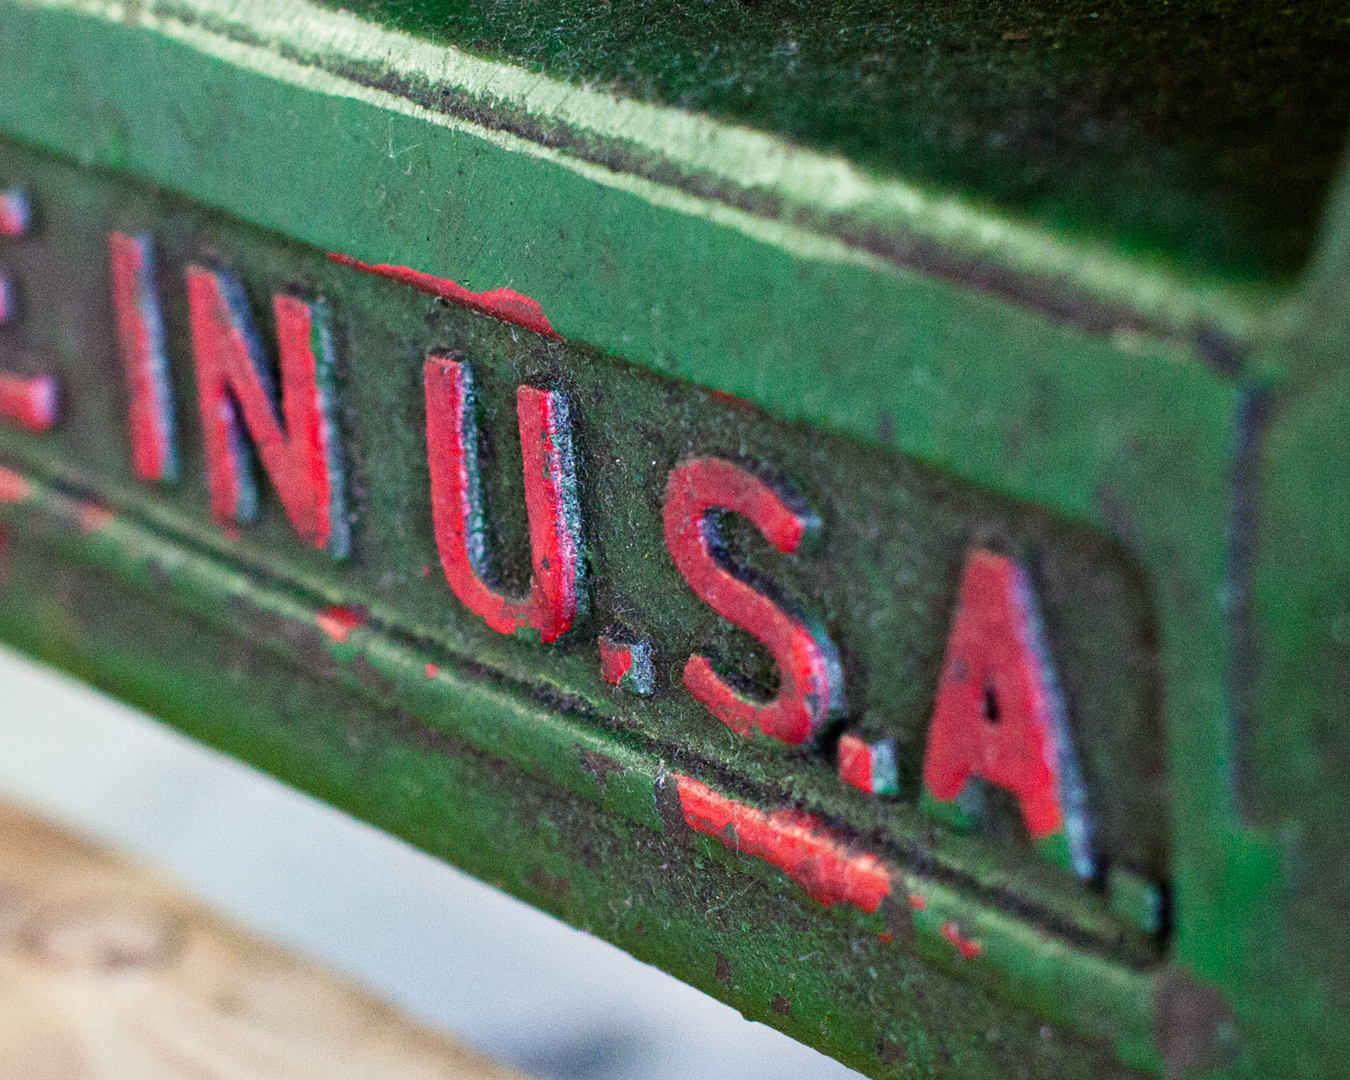 color-photograph-red-text-in-U.S.A-on-green-industrial-machinery